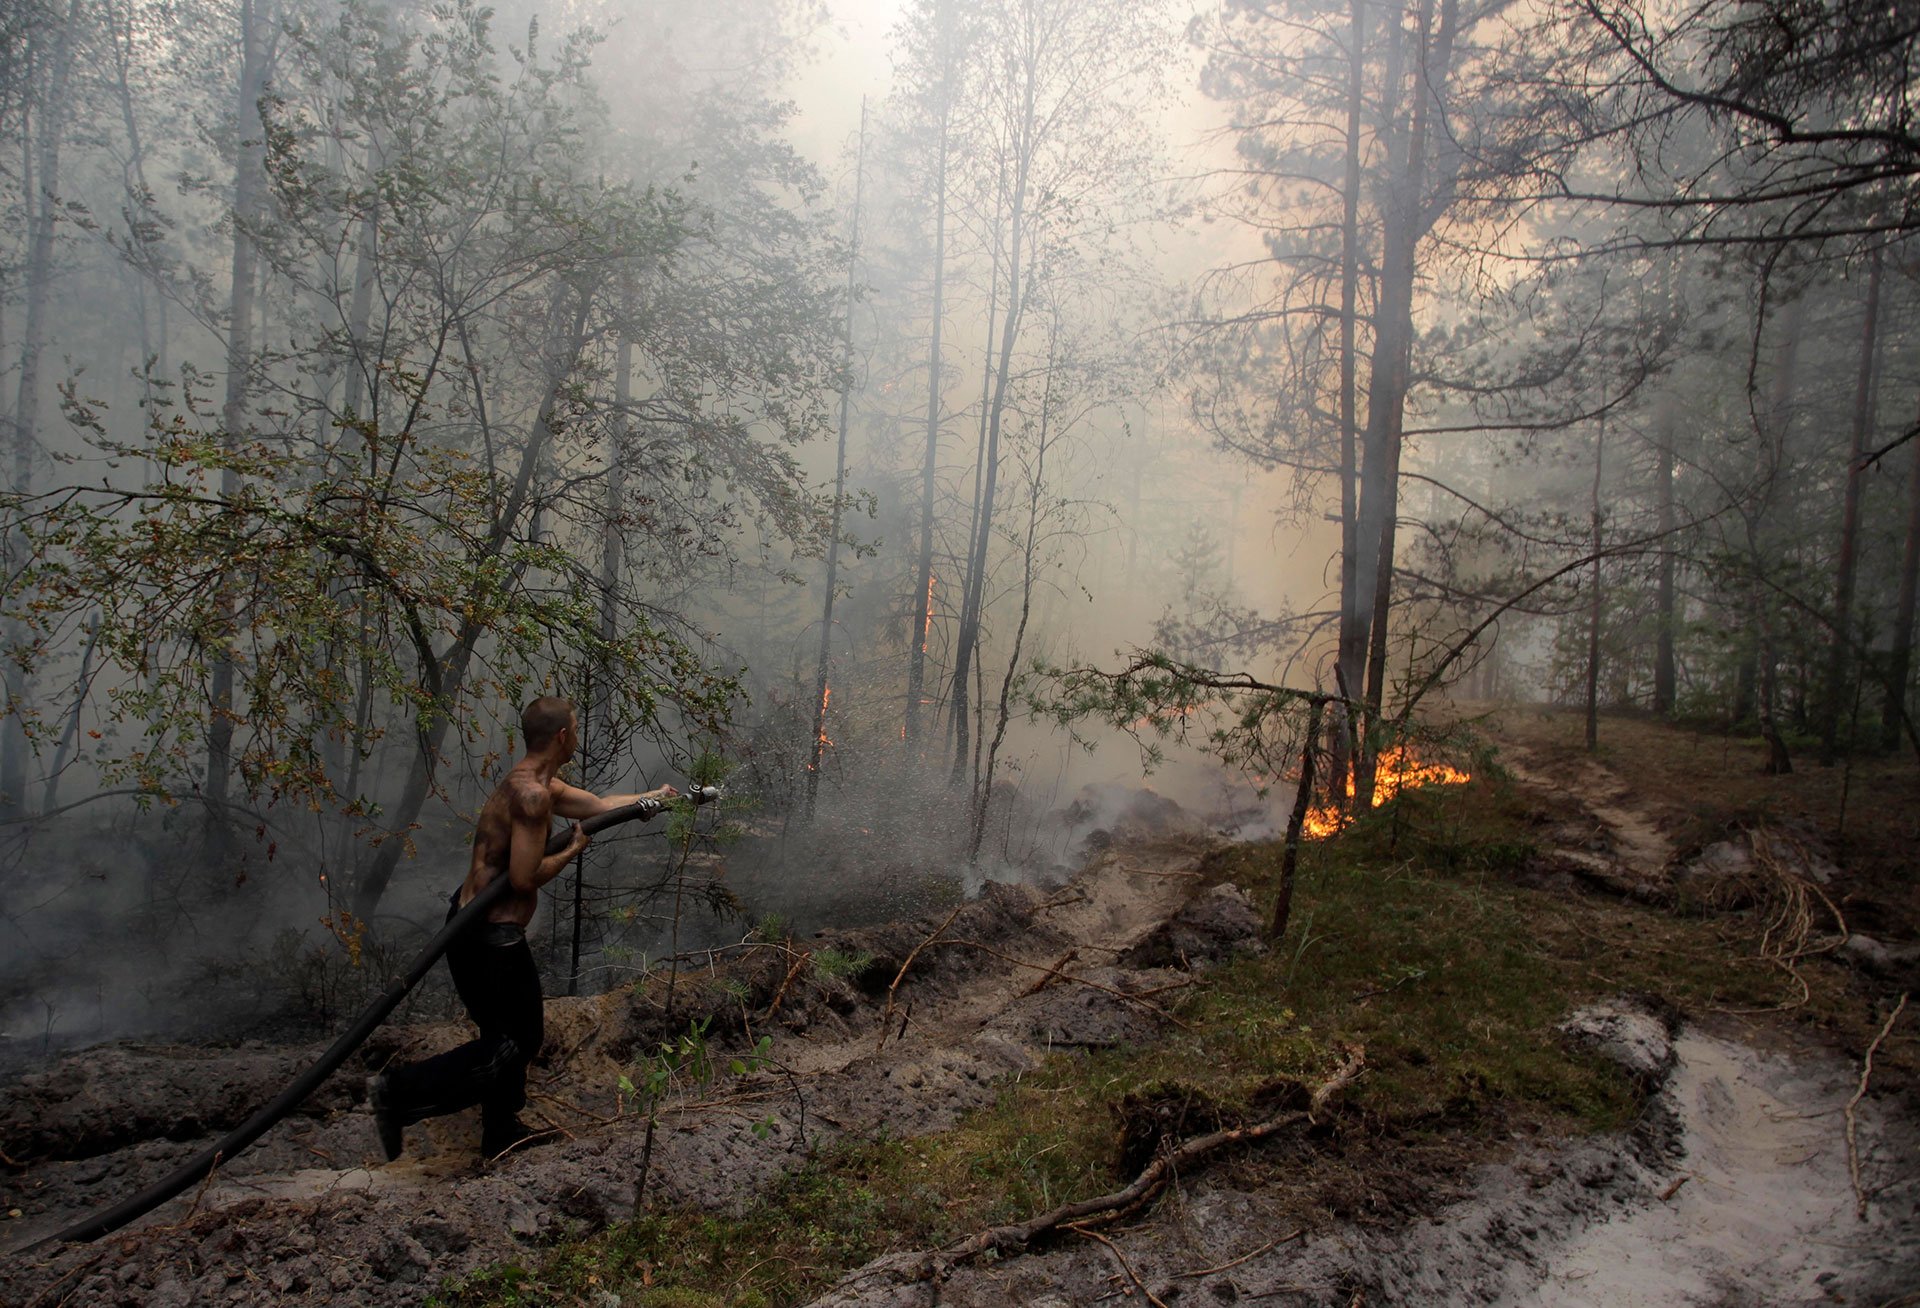 A firefighter tried to stop a forest fire near the village of Verkhnyaya Vereya in Nizhny Novgorod region, some 255 miles east of Moscow, in 2010. Nearly 600 separate blazes were burning nationwide, mainly across western Russia. Hundreds of forest and peat bog fires had ignited amid the country's most intense heat wave in 130 years of record-keeping.